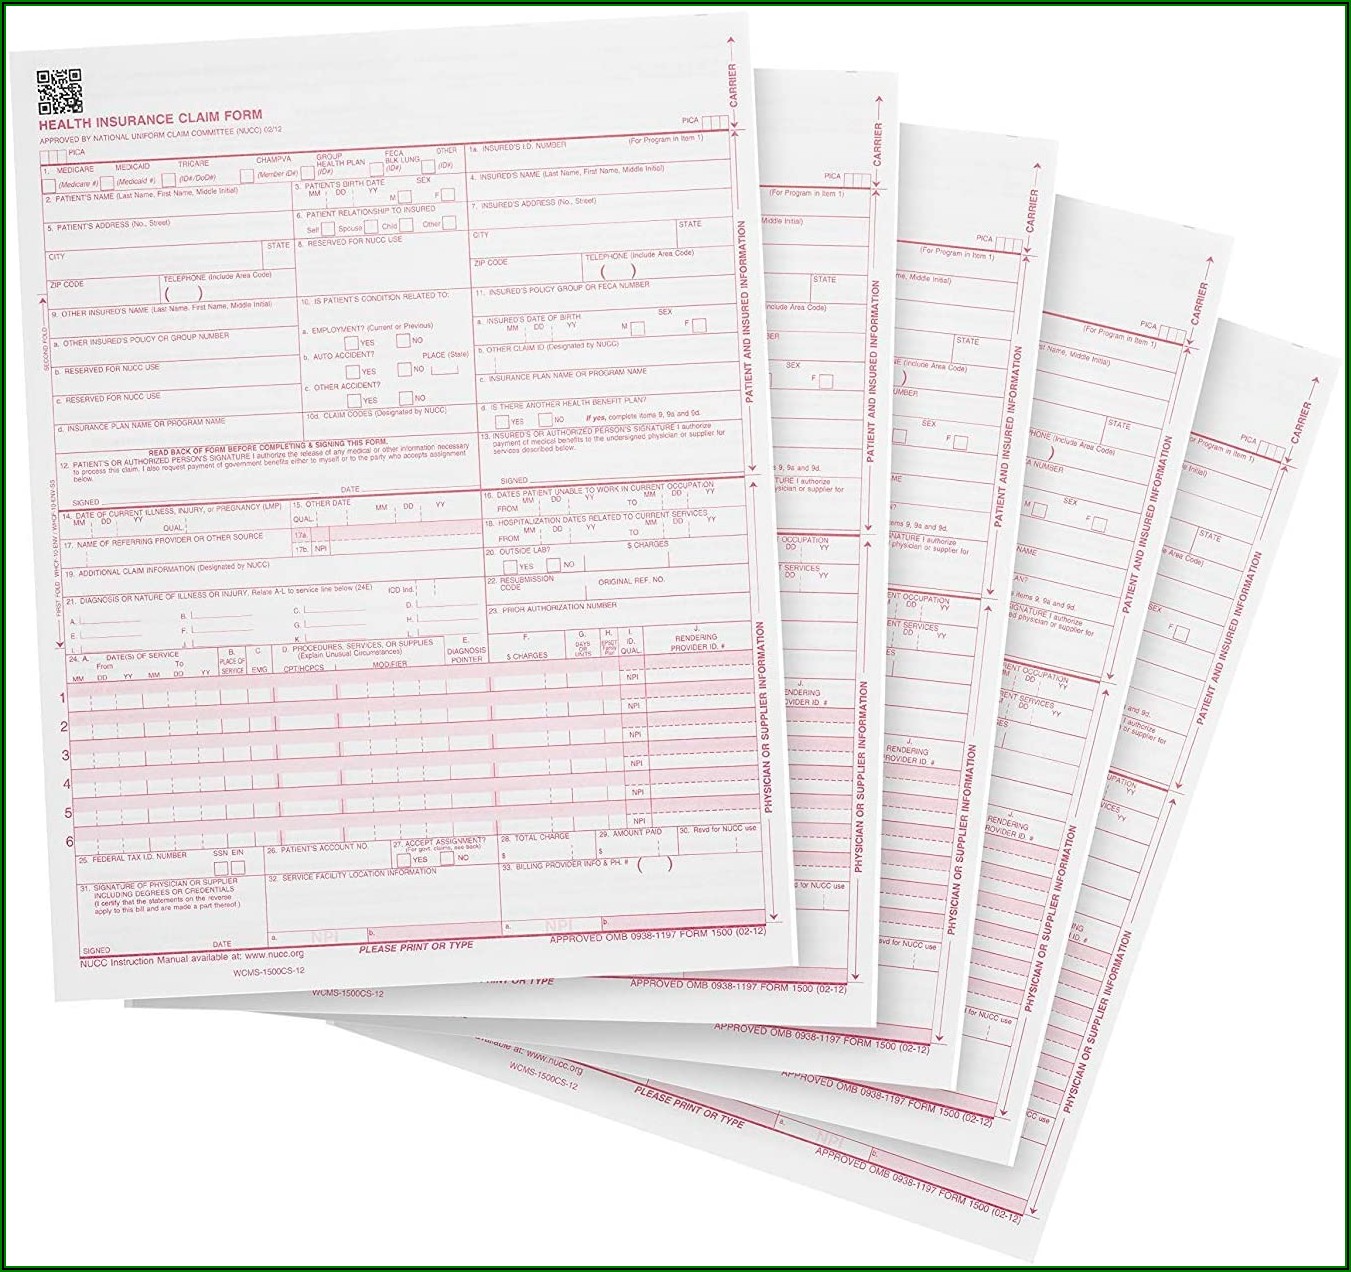 Cms 1500 Forms For Sale